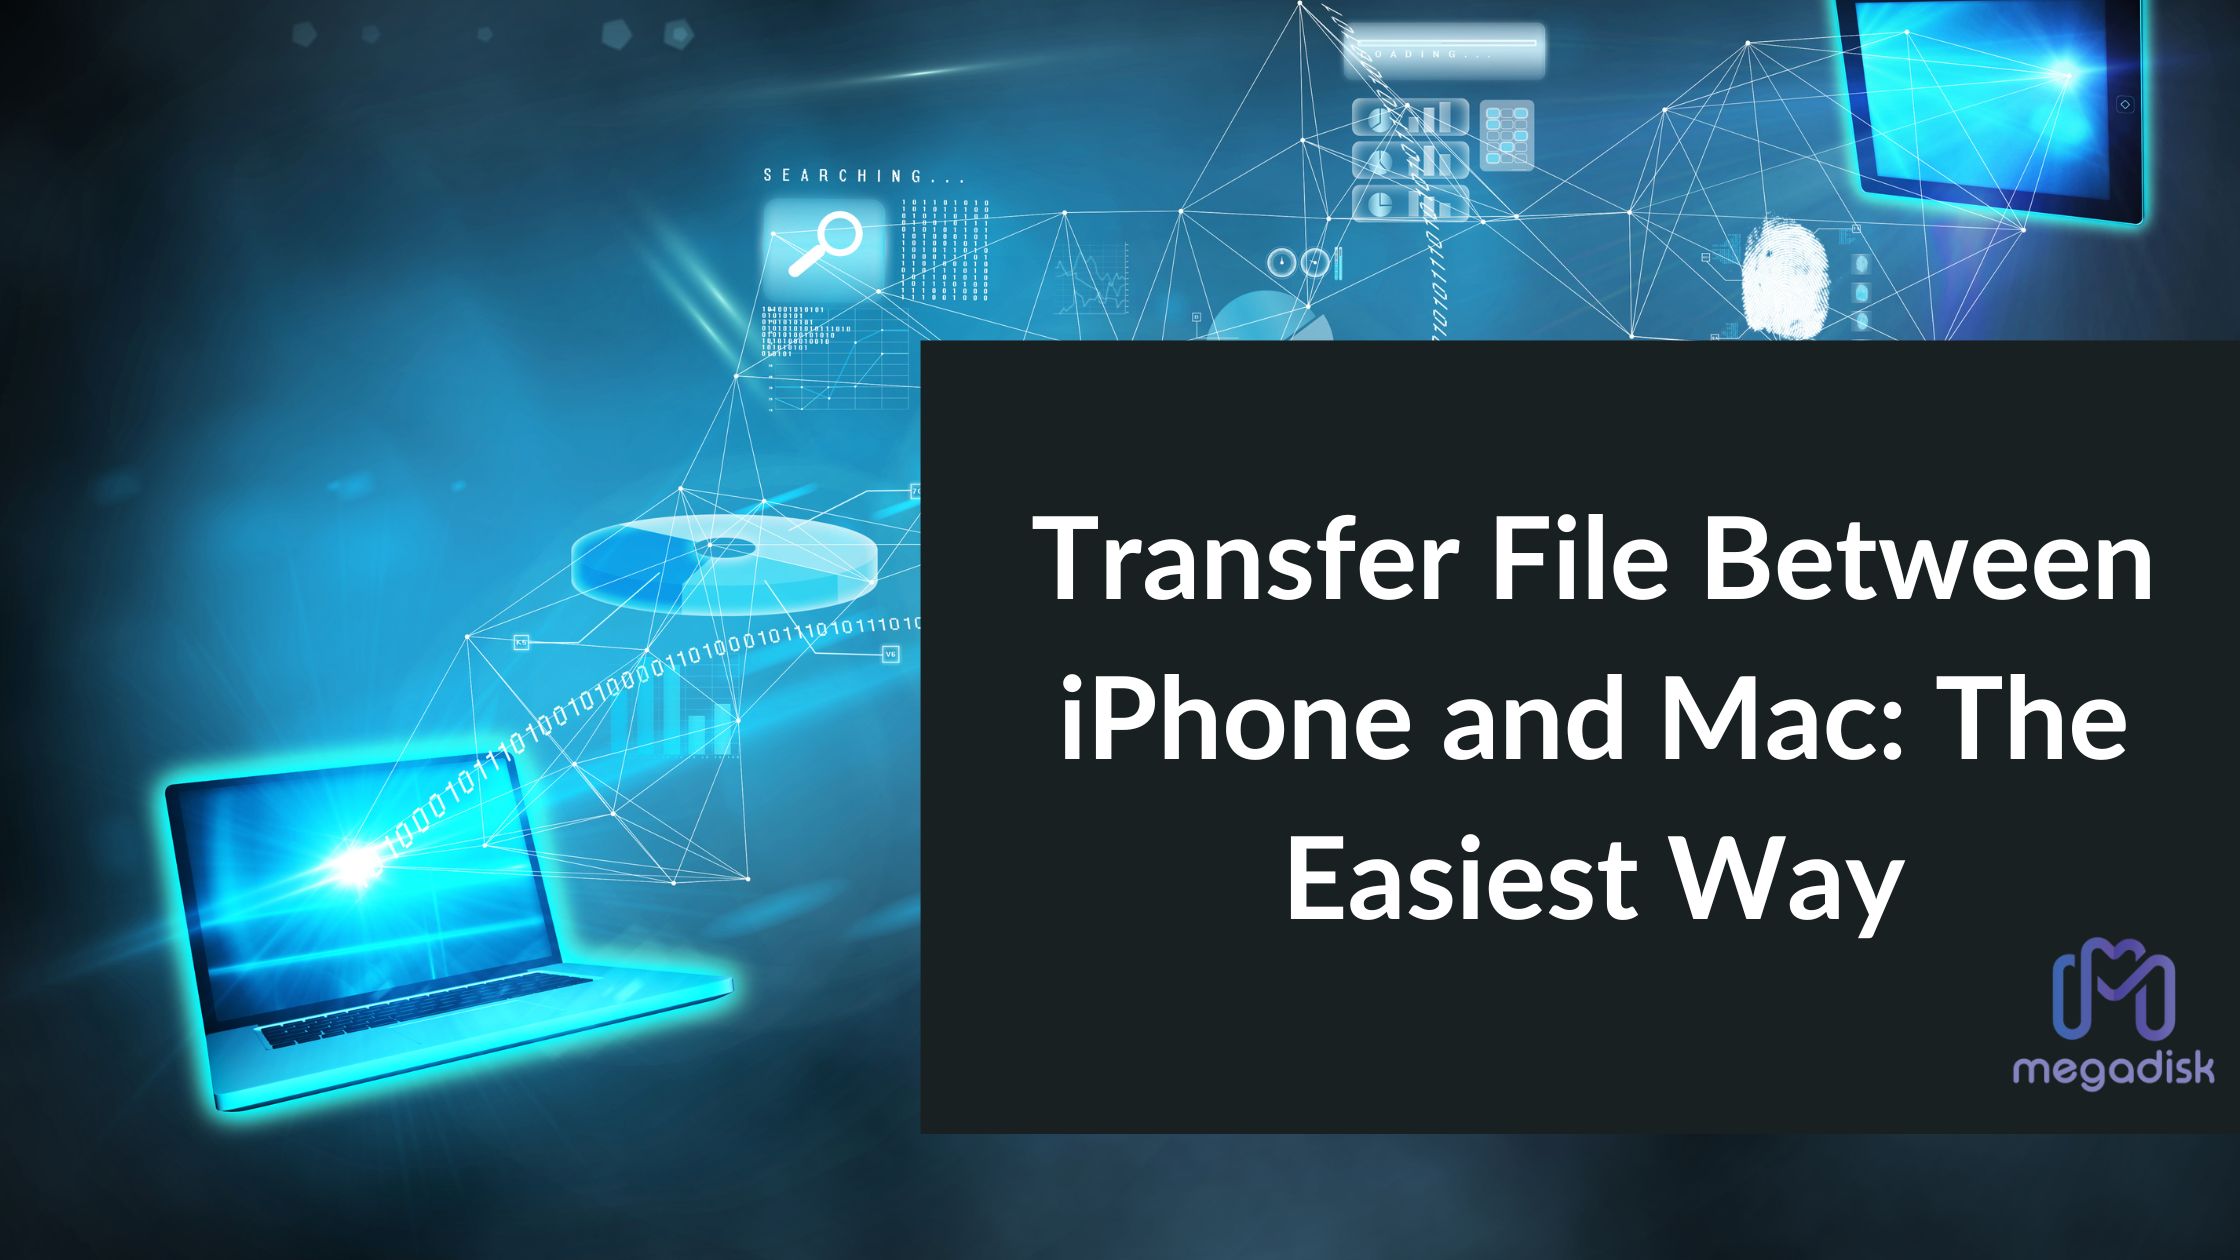 Transfer File Between iPhone and Mac: The Easiest Way